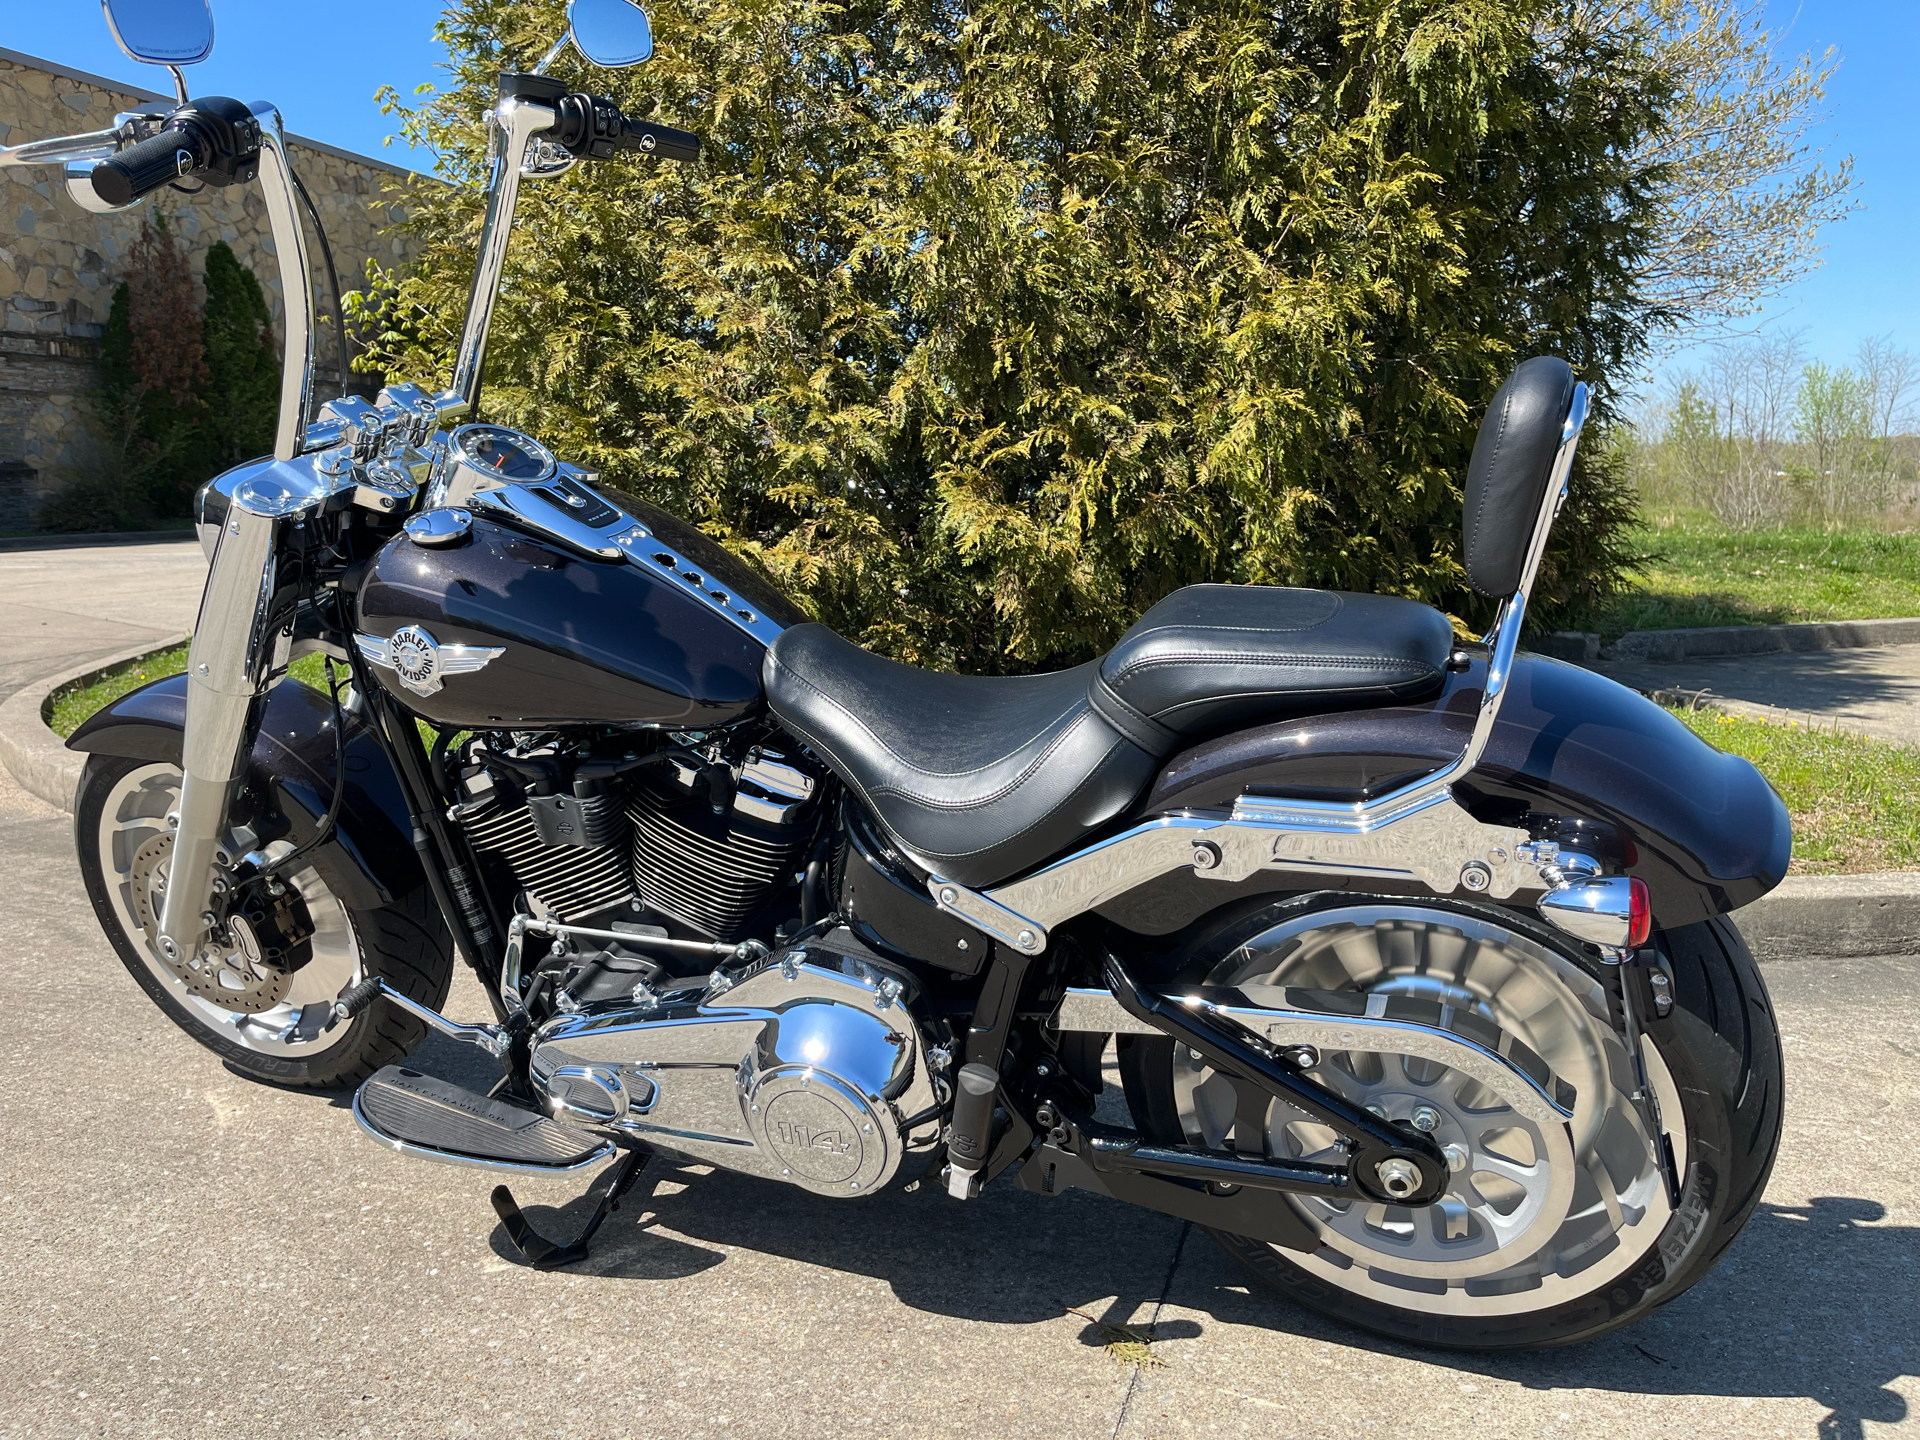 2021 Harley-Davidson Fat Boy 114 in Columbia, Tennessee - Photo 10